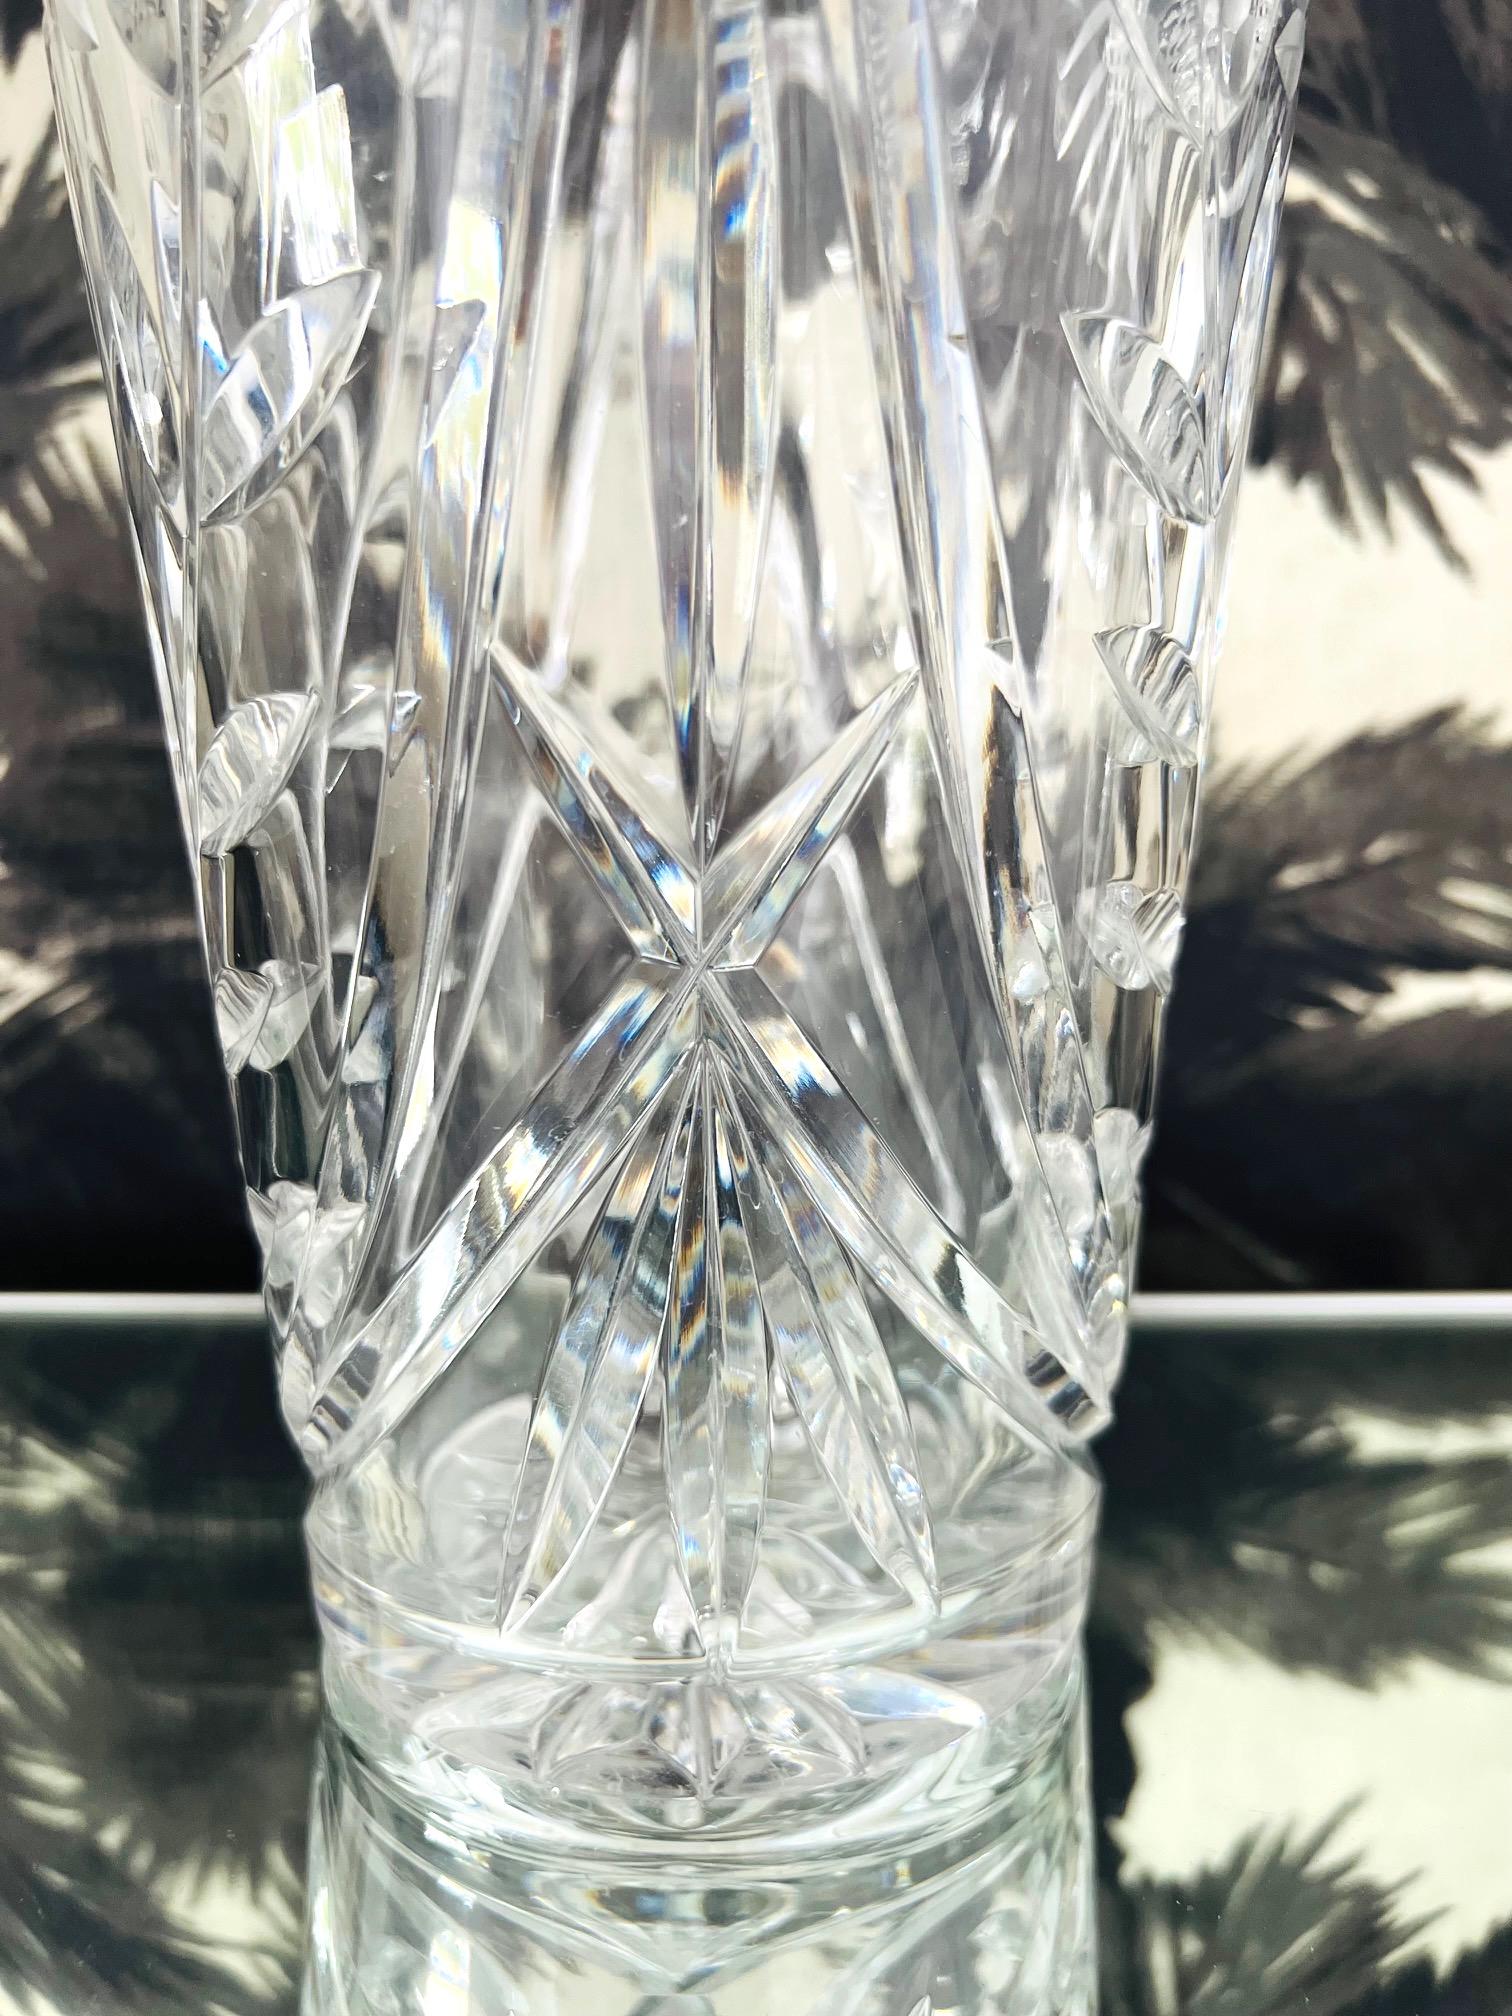 Waterford Crystal Etched Sunflower Vase with Cut Glass Designs, England, c. 2010 For Sale 5